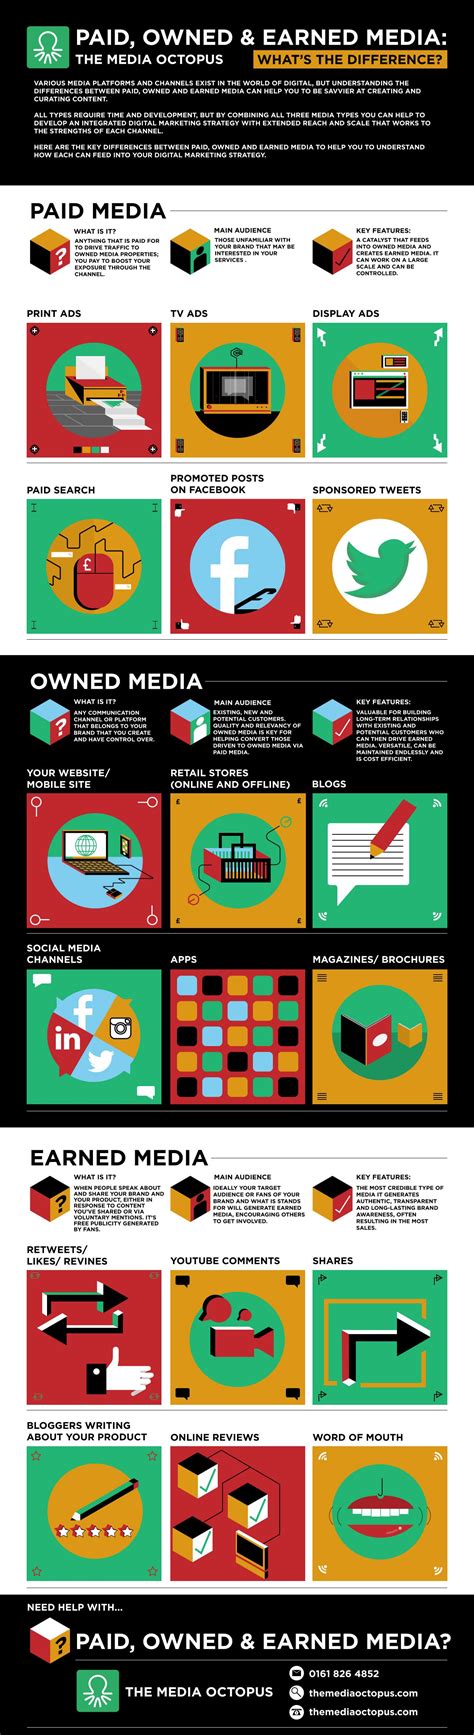 Paid Owned And Earned Media Newbie Guide To